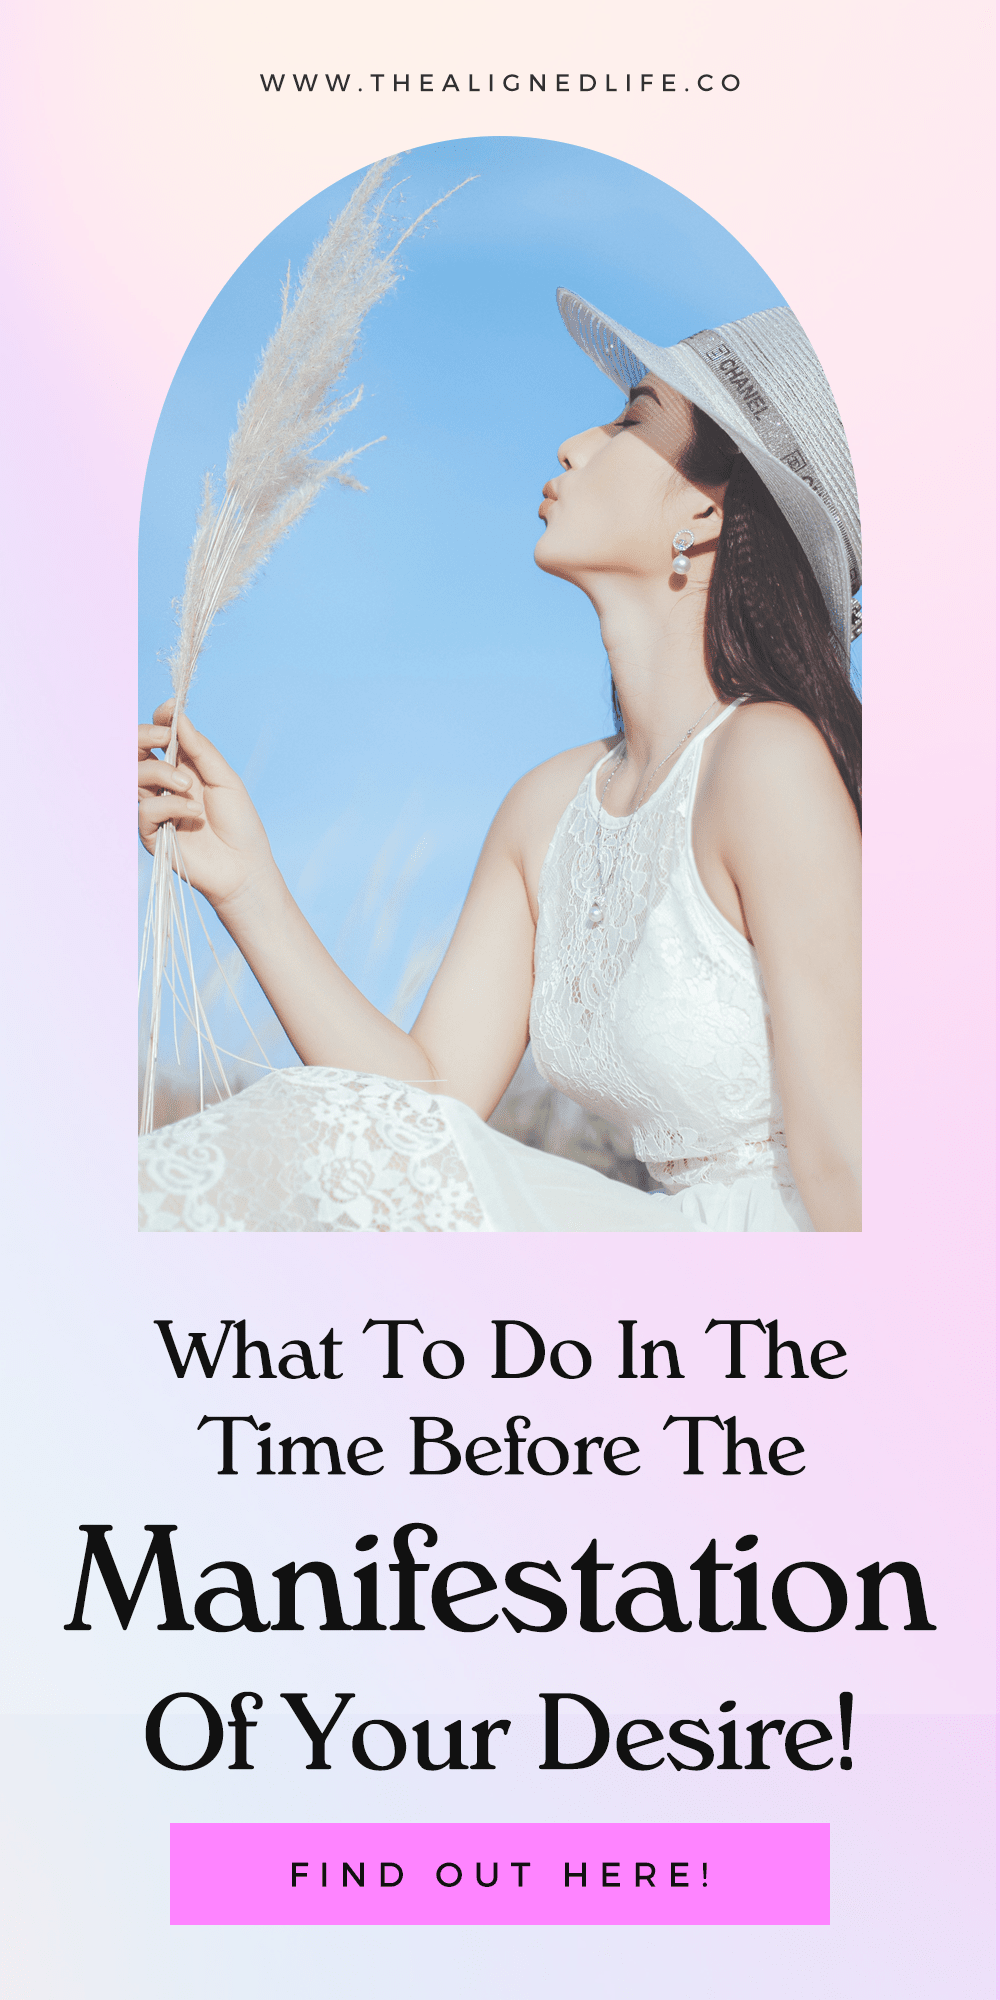 What To Do In The Time Before The Manifestation Of Your Desire